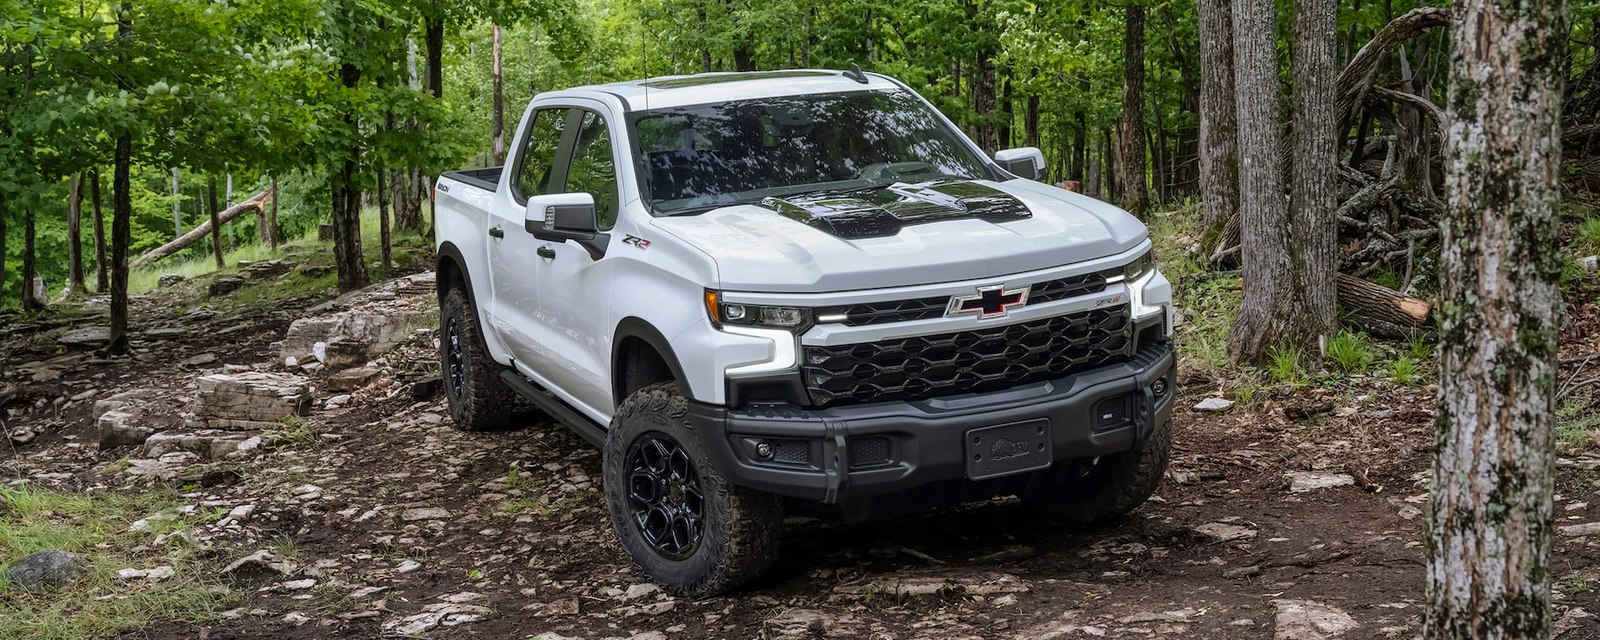 Chevy Silverado 1500 in the woods